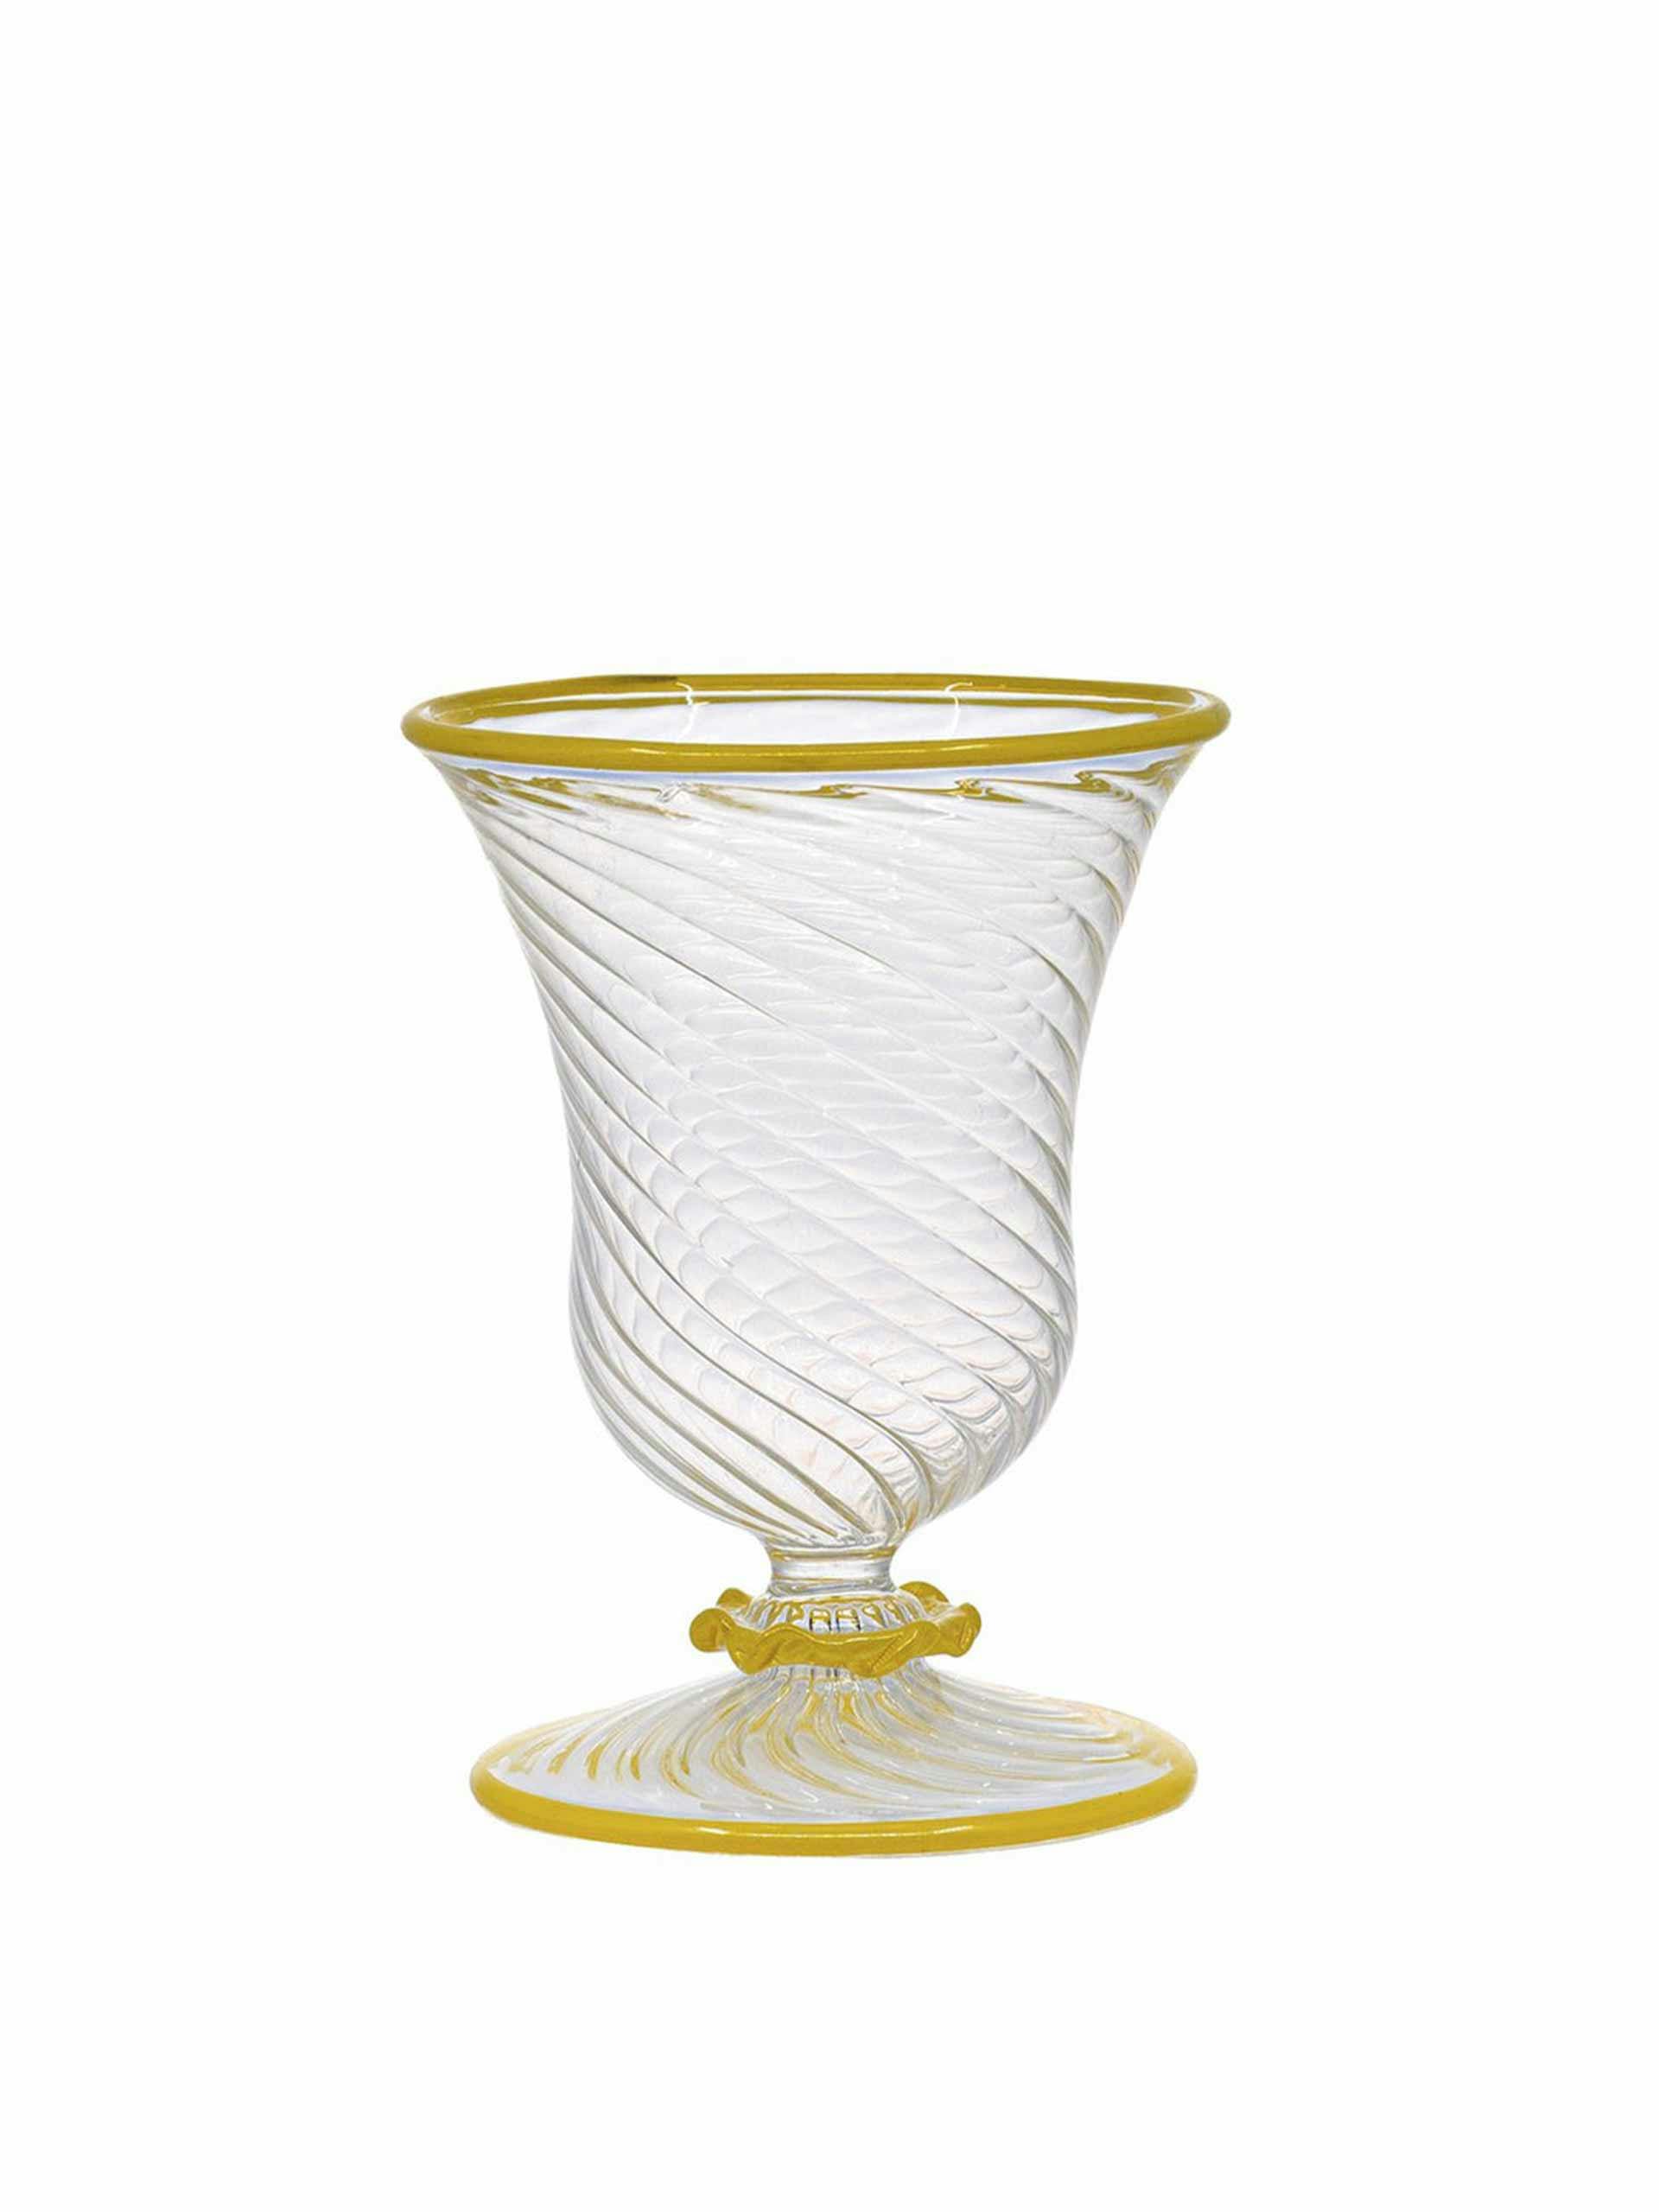 Hand blown glass with yellow rim